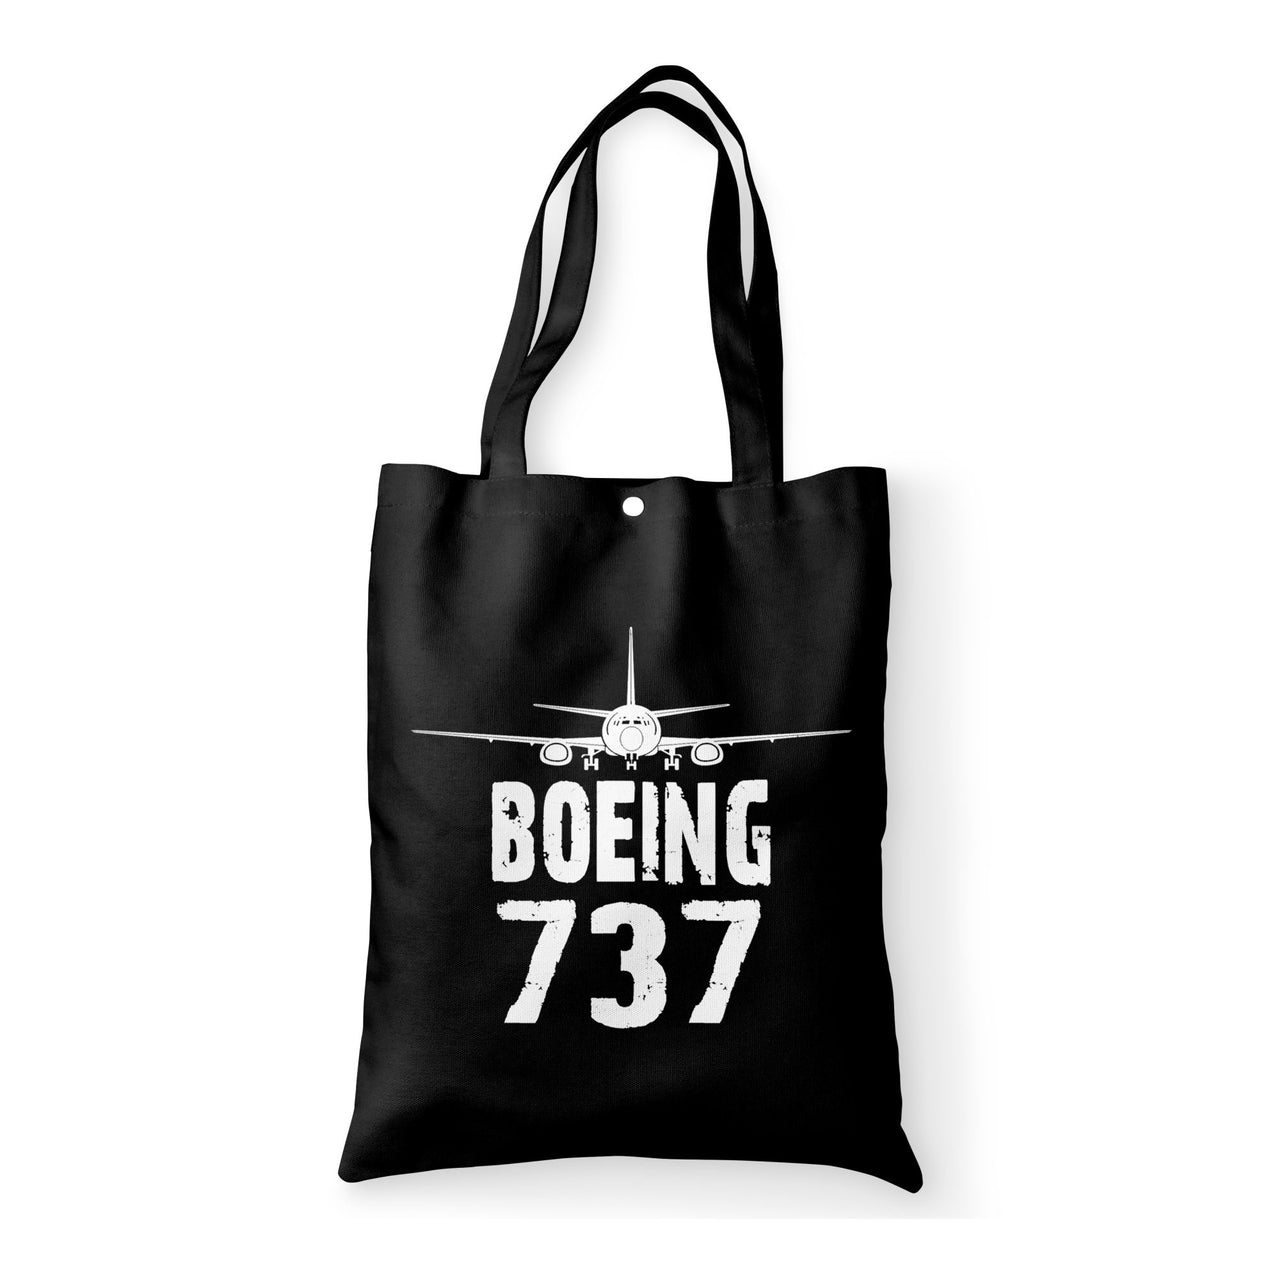 Boeing 737 & Plane Designed Tote Bags